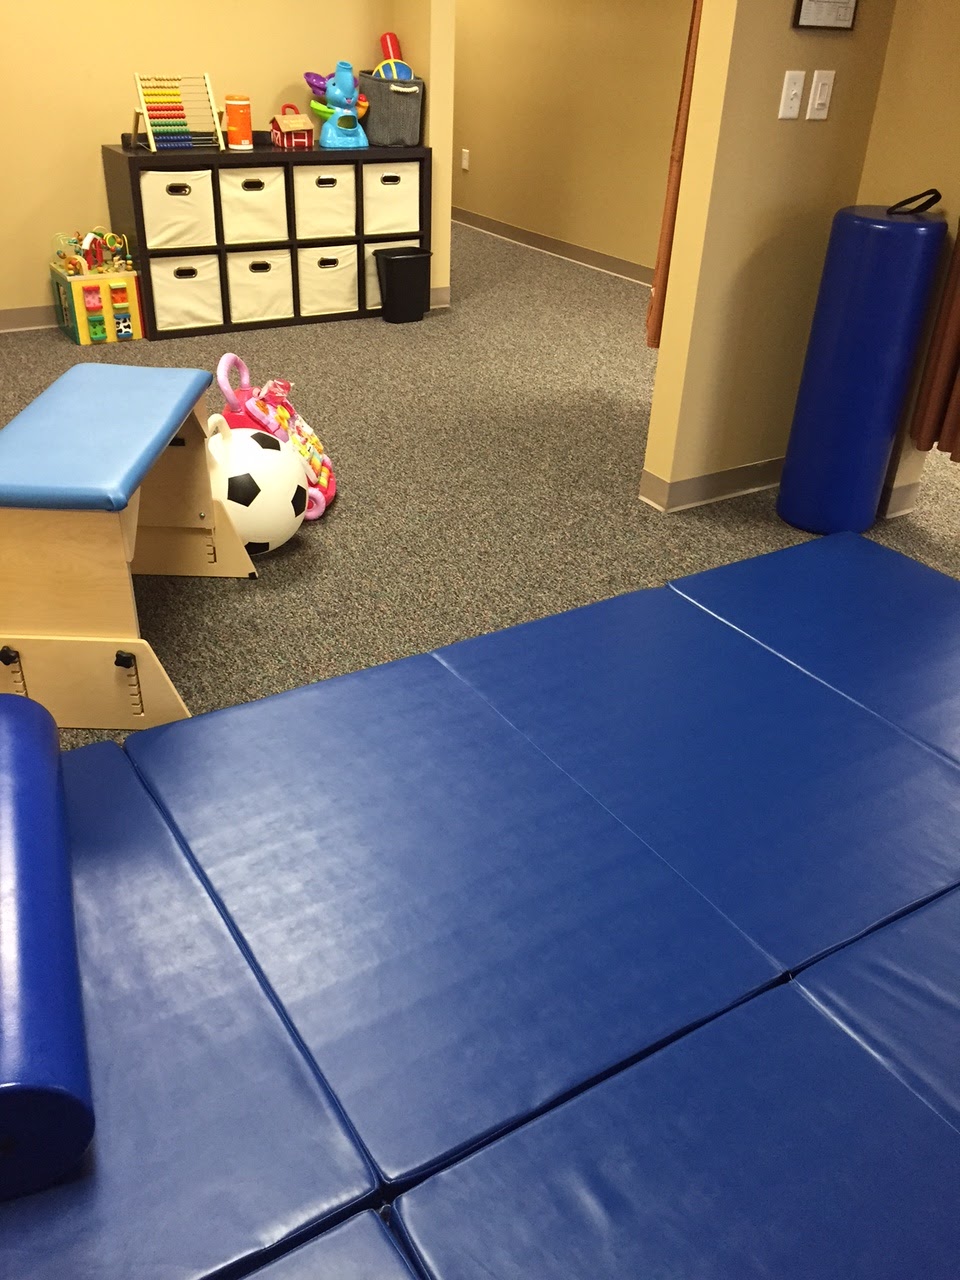 Physical Therapy Care & Aquatic Rehab of Fort Bend